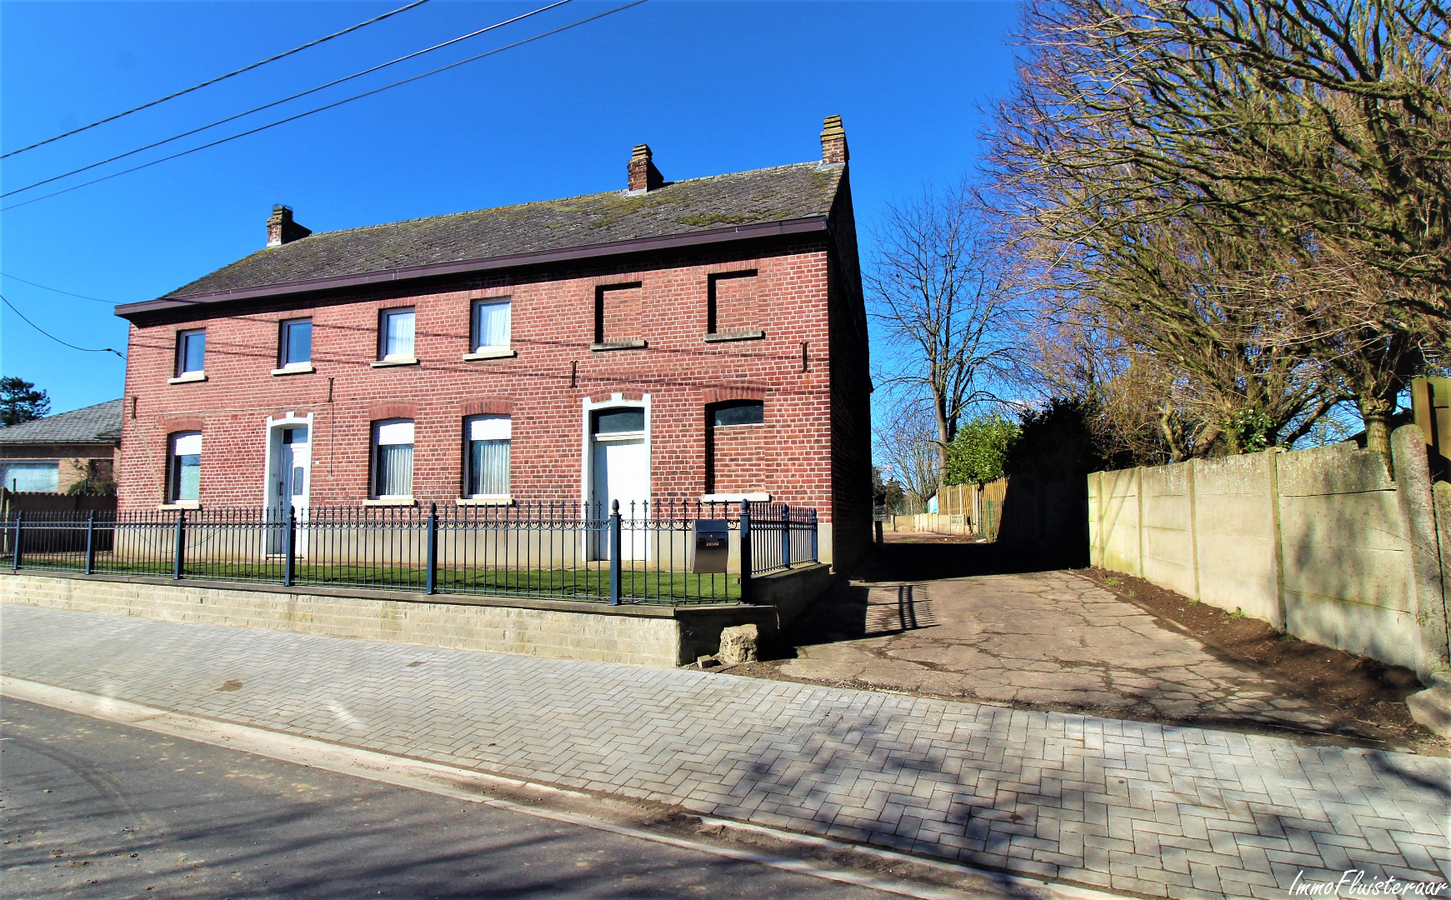 Property sold in Geetbets